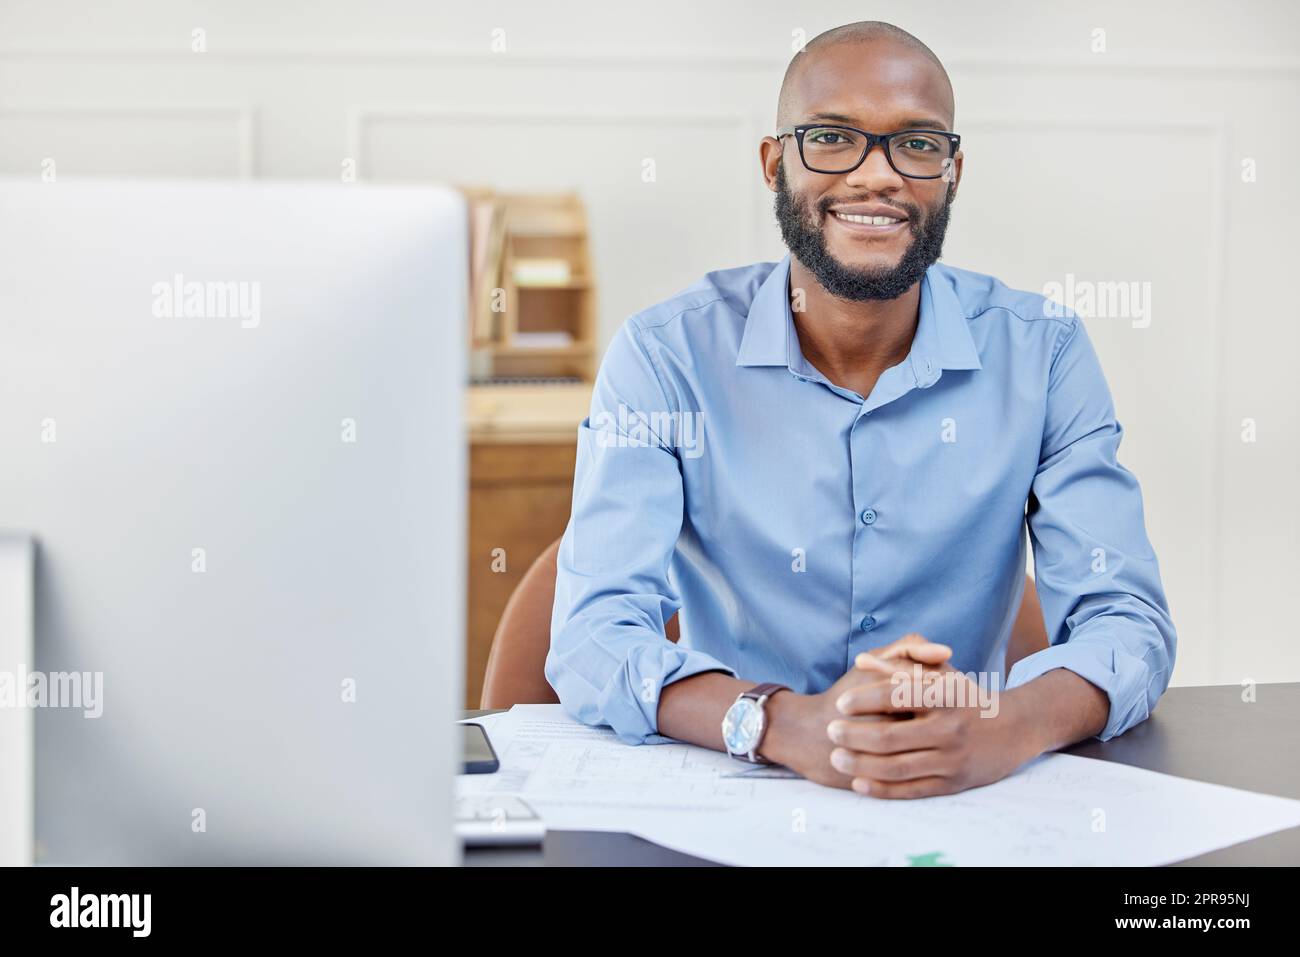 Even when youve reached your goals, keep pushing just as hard. Portrait of a businessman smiling while sitting at his desk. Stock Photo